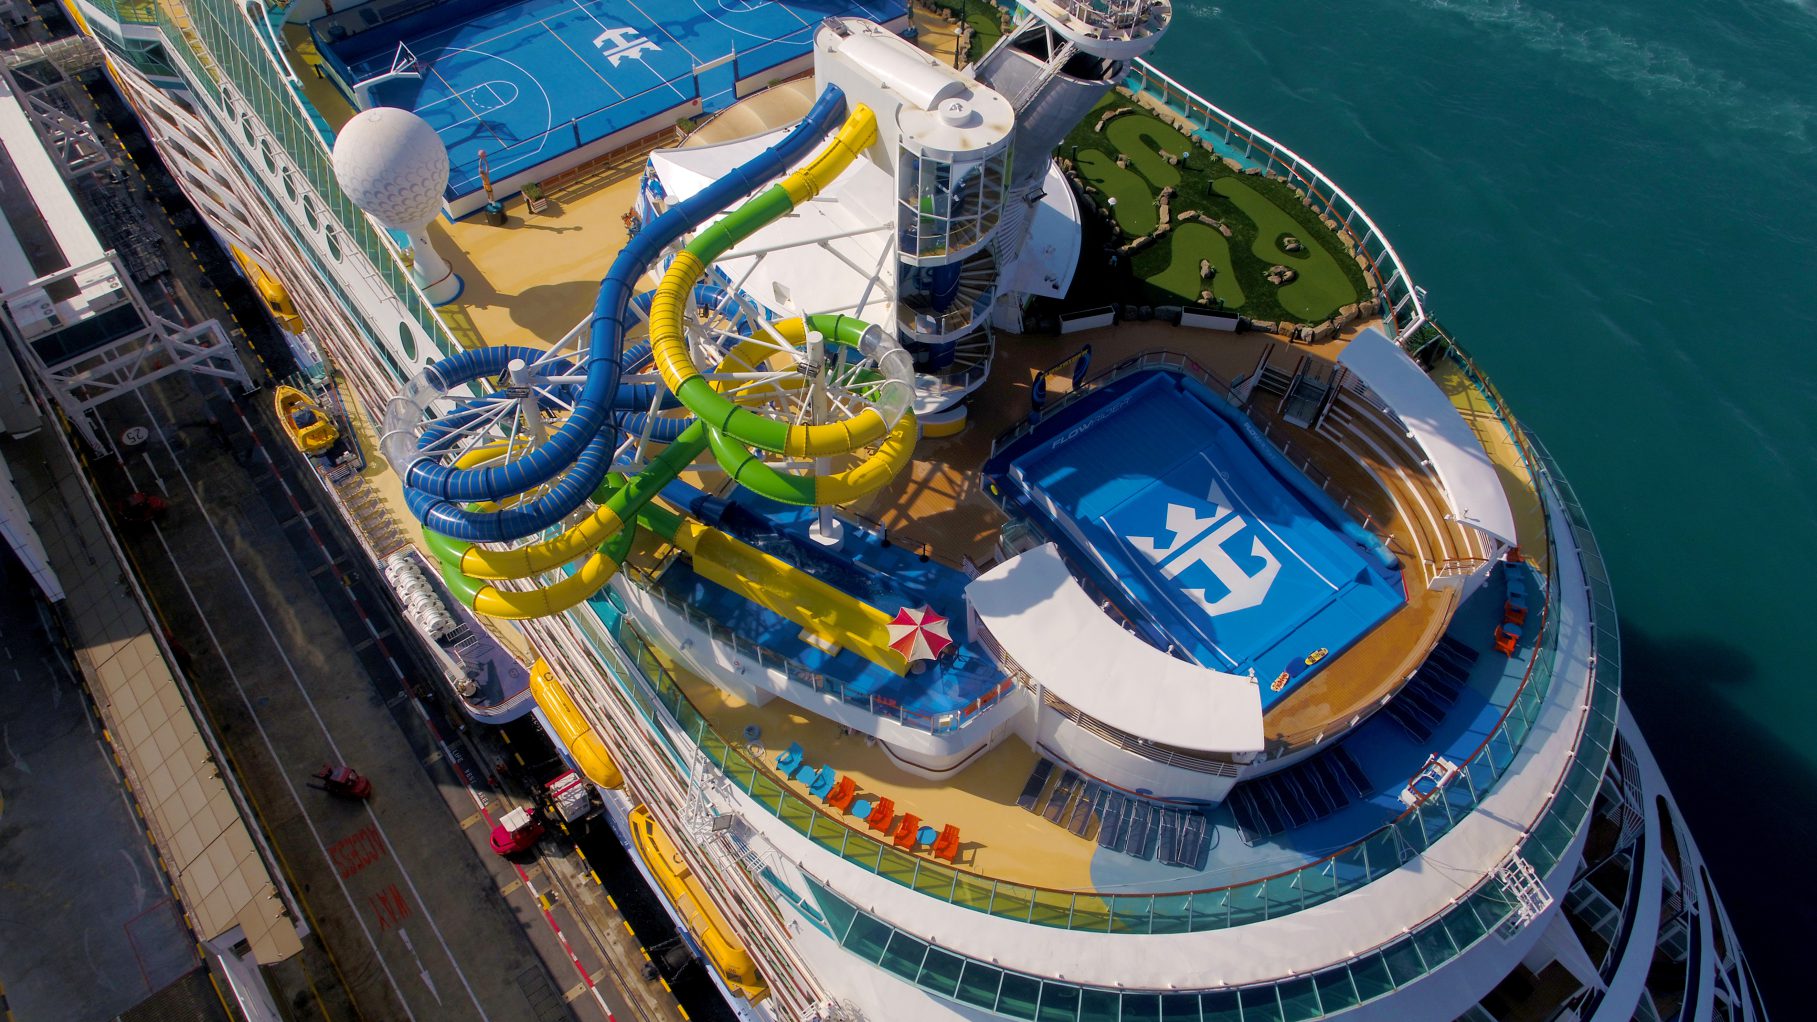 An aerial view of The Perfect Storm on Voyager of the Seas.